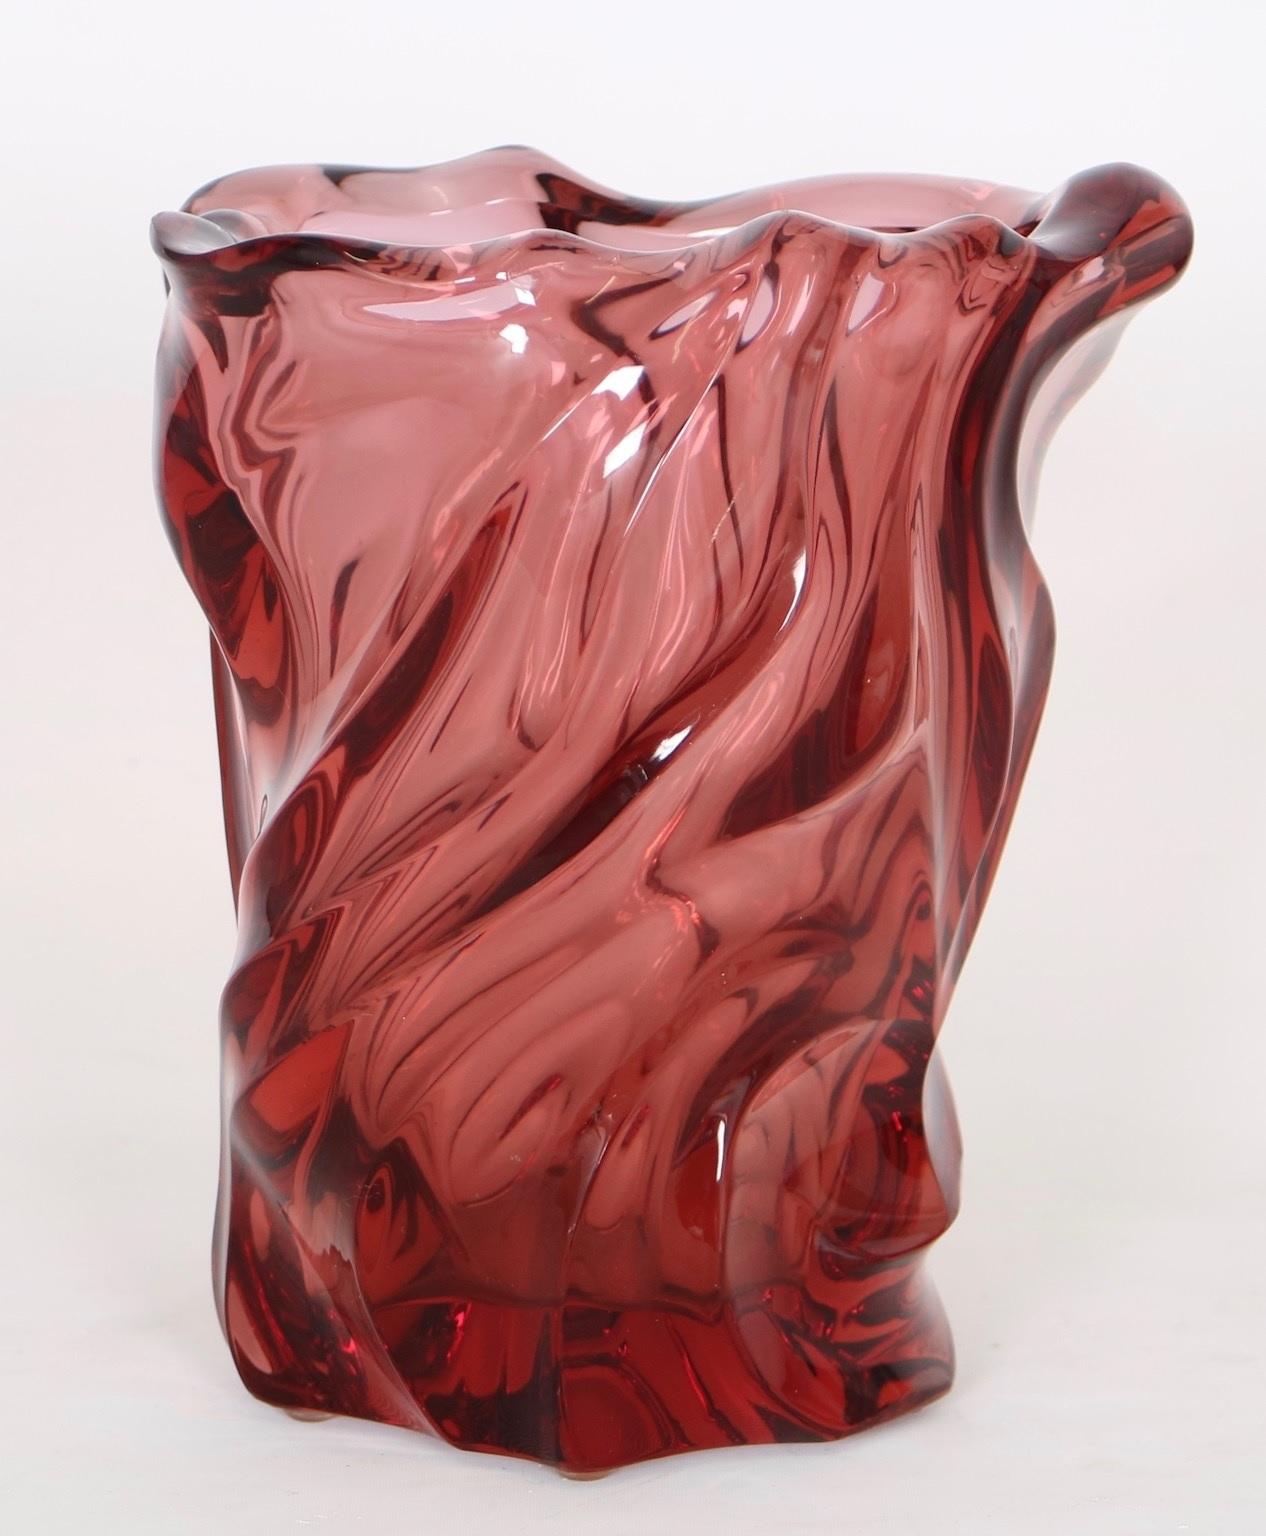 Czech Art Deco heavy crystal vase in shallow form made by Heinrich Hussmann for Ludwig Moser & Sohne. The piece was made in 1930 in the Czech Republic and is in excellent vintage condition.